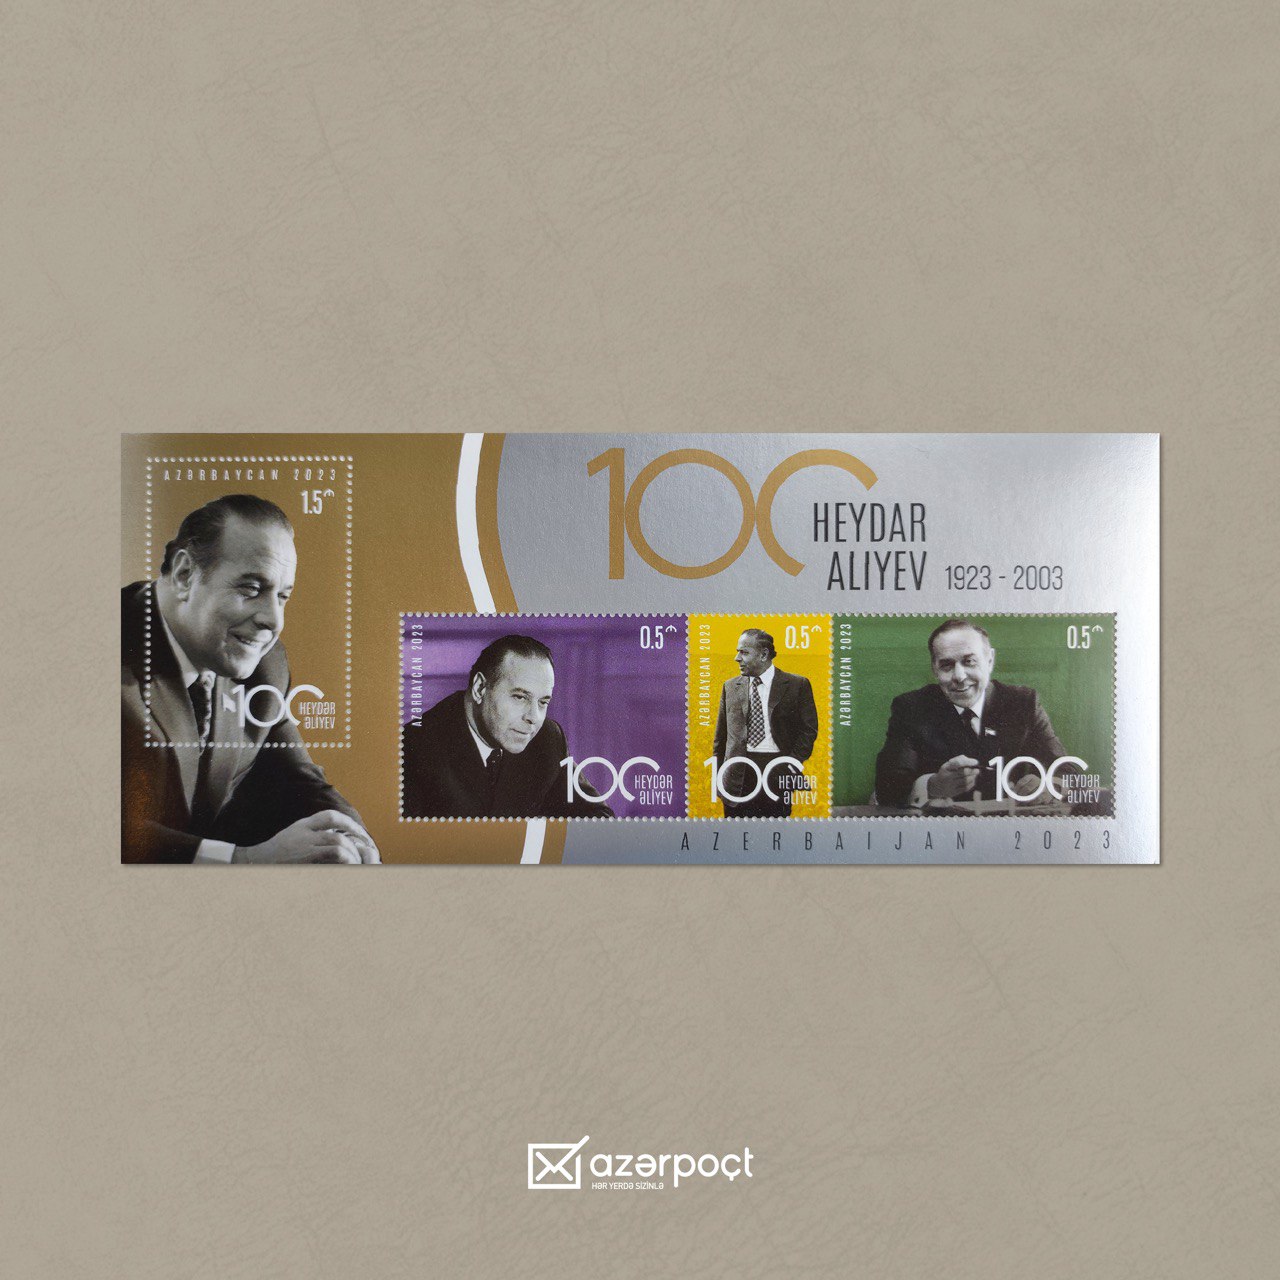 Postage stamps dedicated to the 100th anniversary of the birth of the Great Leader Heydar Aliyev have been released